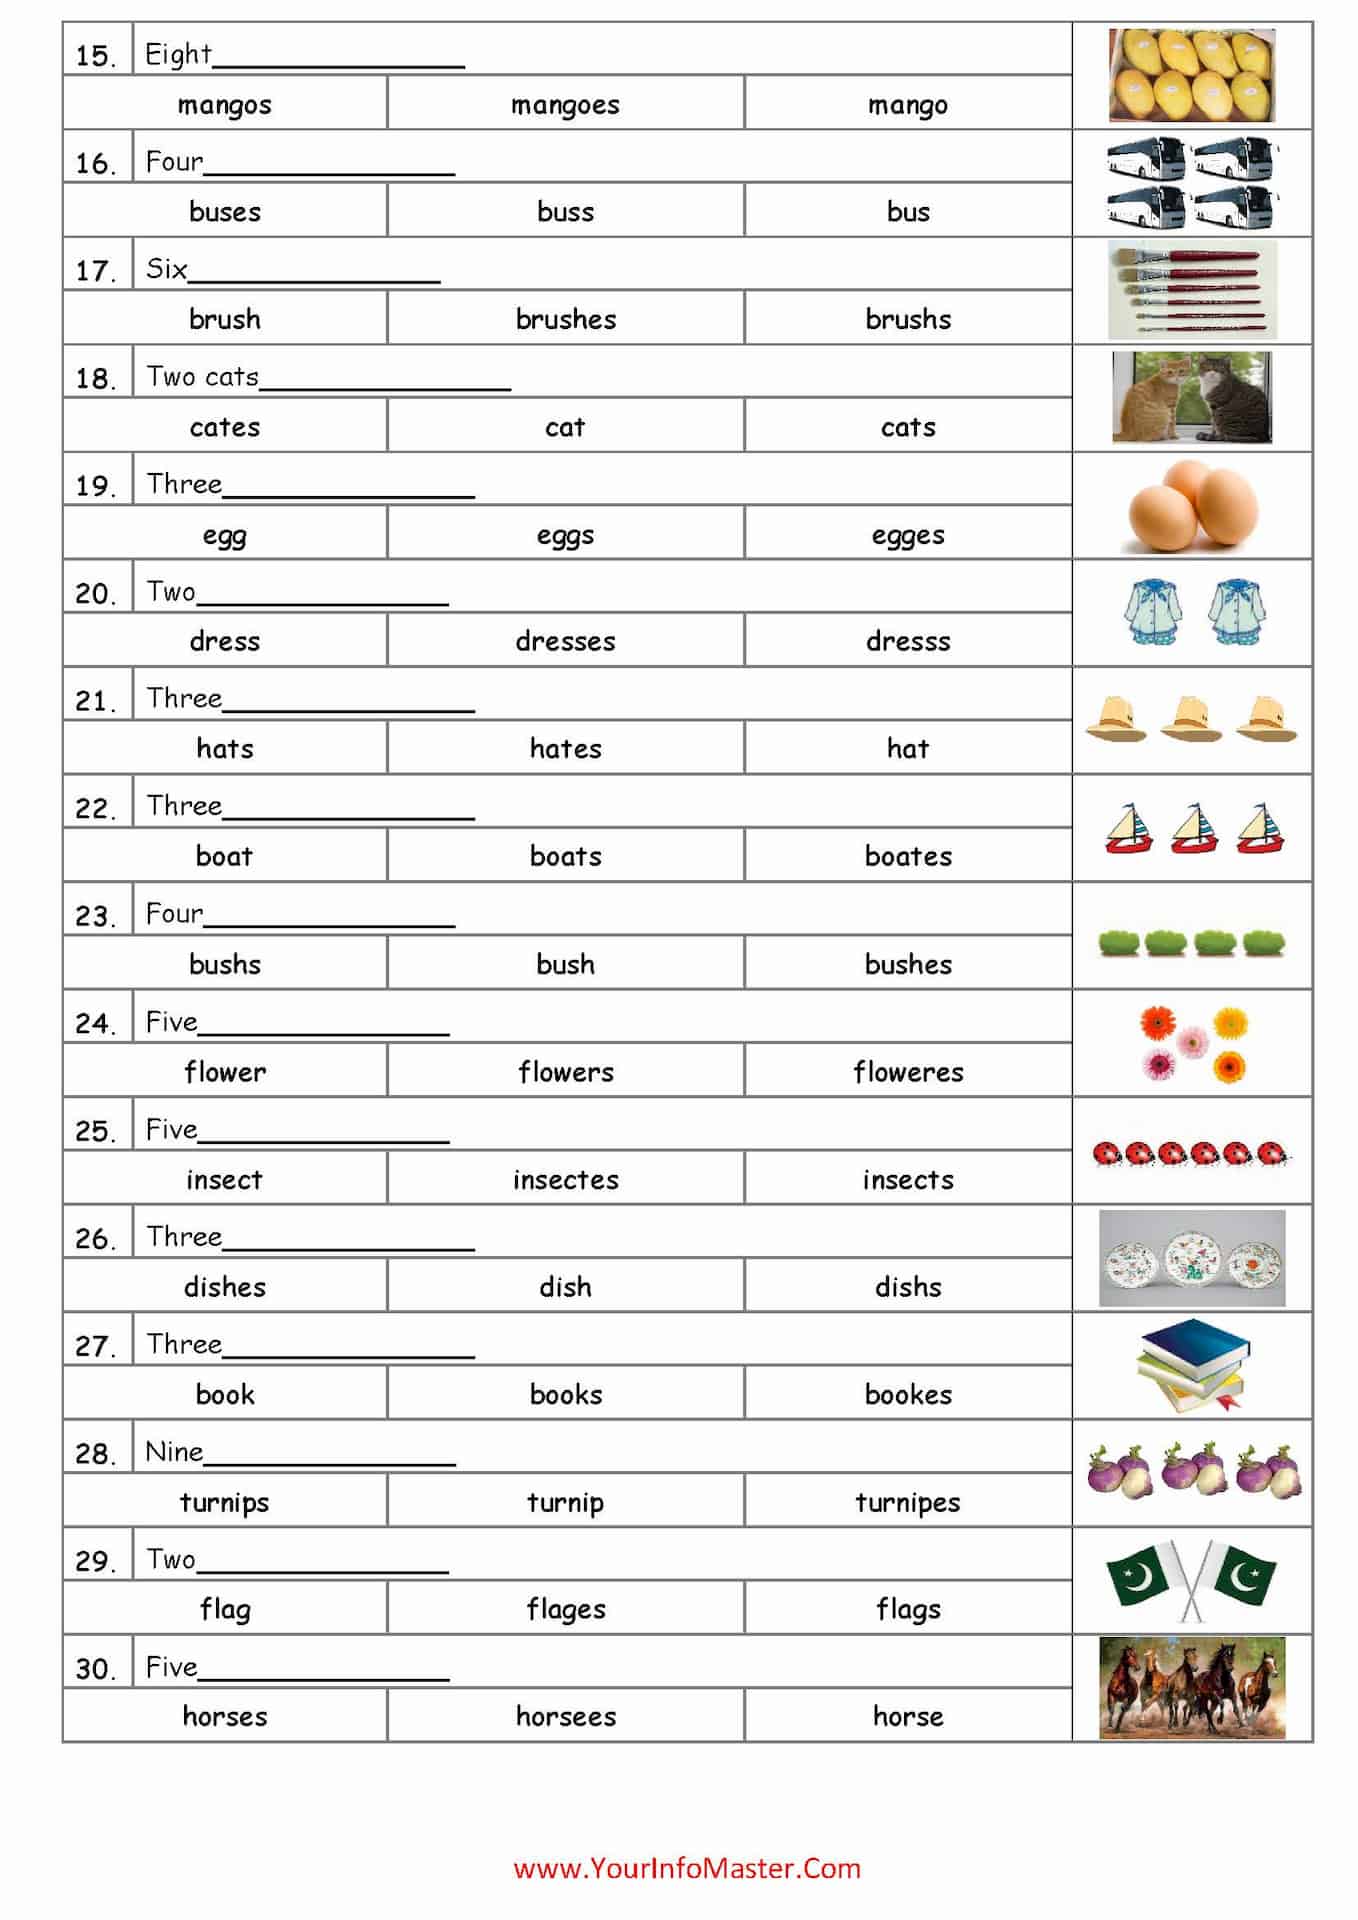 Easy way of Teaching Singular and Plural Nouns - Your Info Master